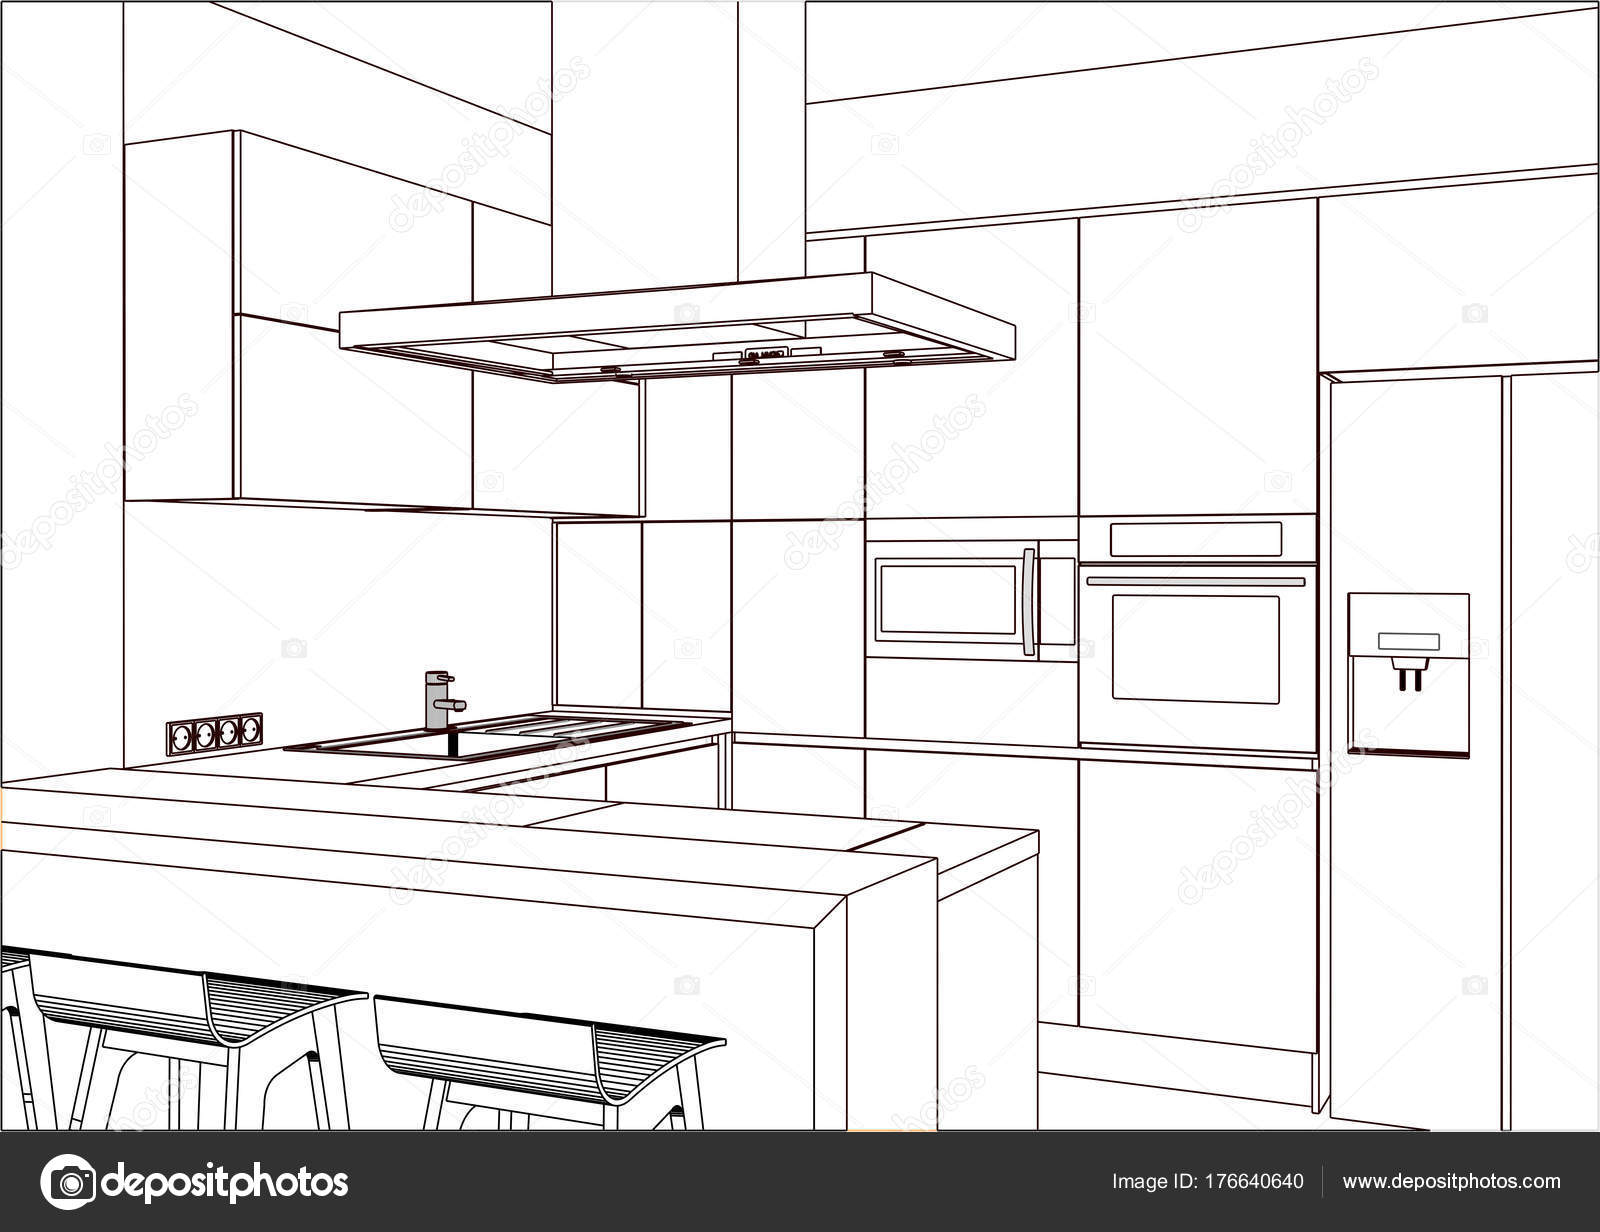 How to Draw A Kitchen in Two Point Perspective | Step By Step - YouTube